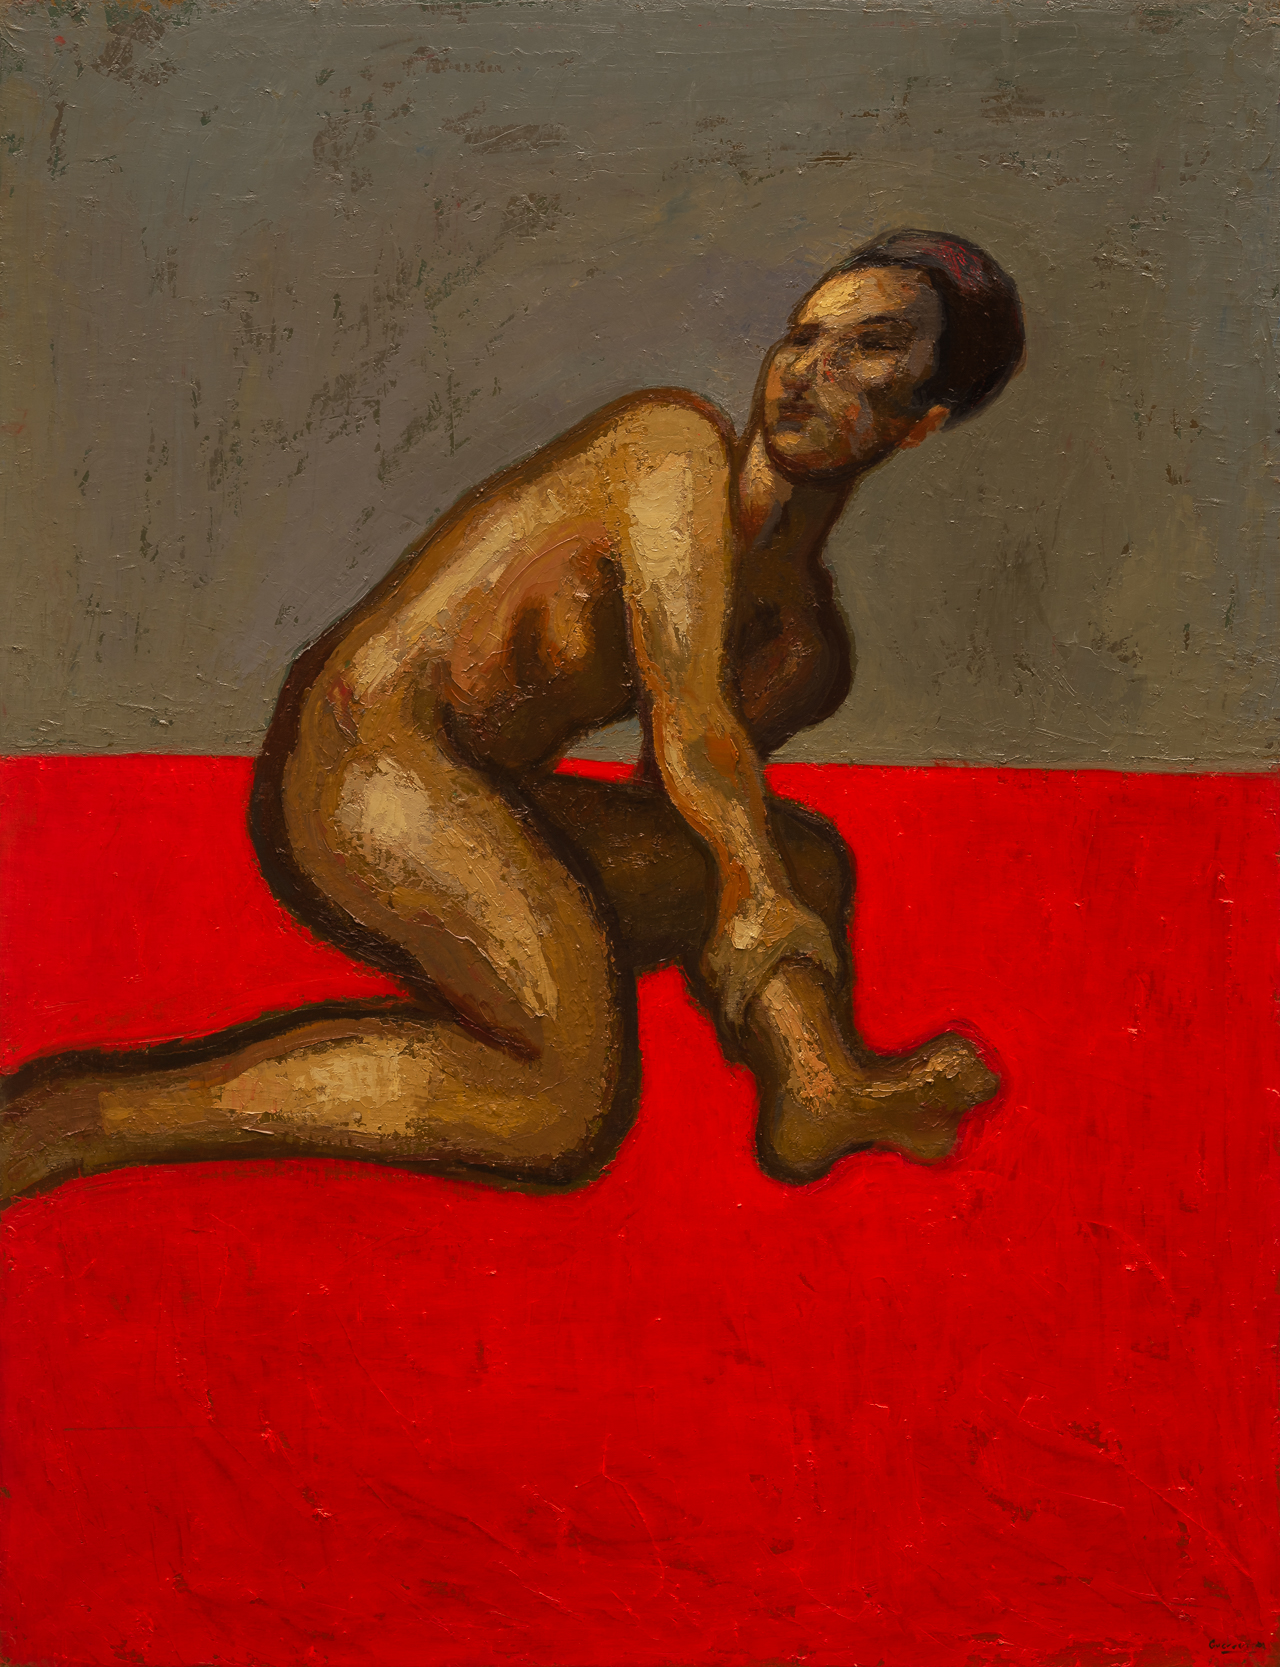 Oil on canvas painting from the Red series, by spanish artist Jose Maria Guerrero Medina